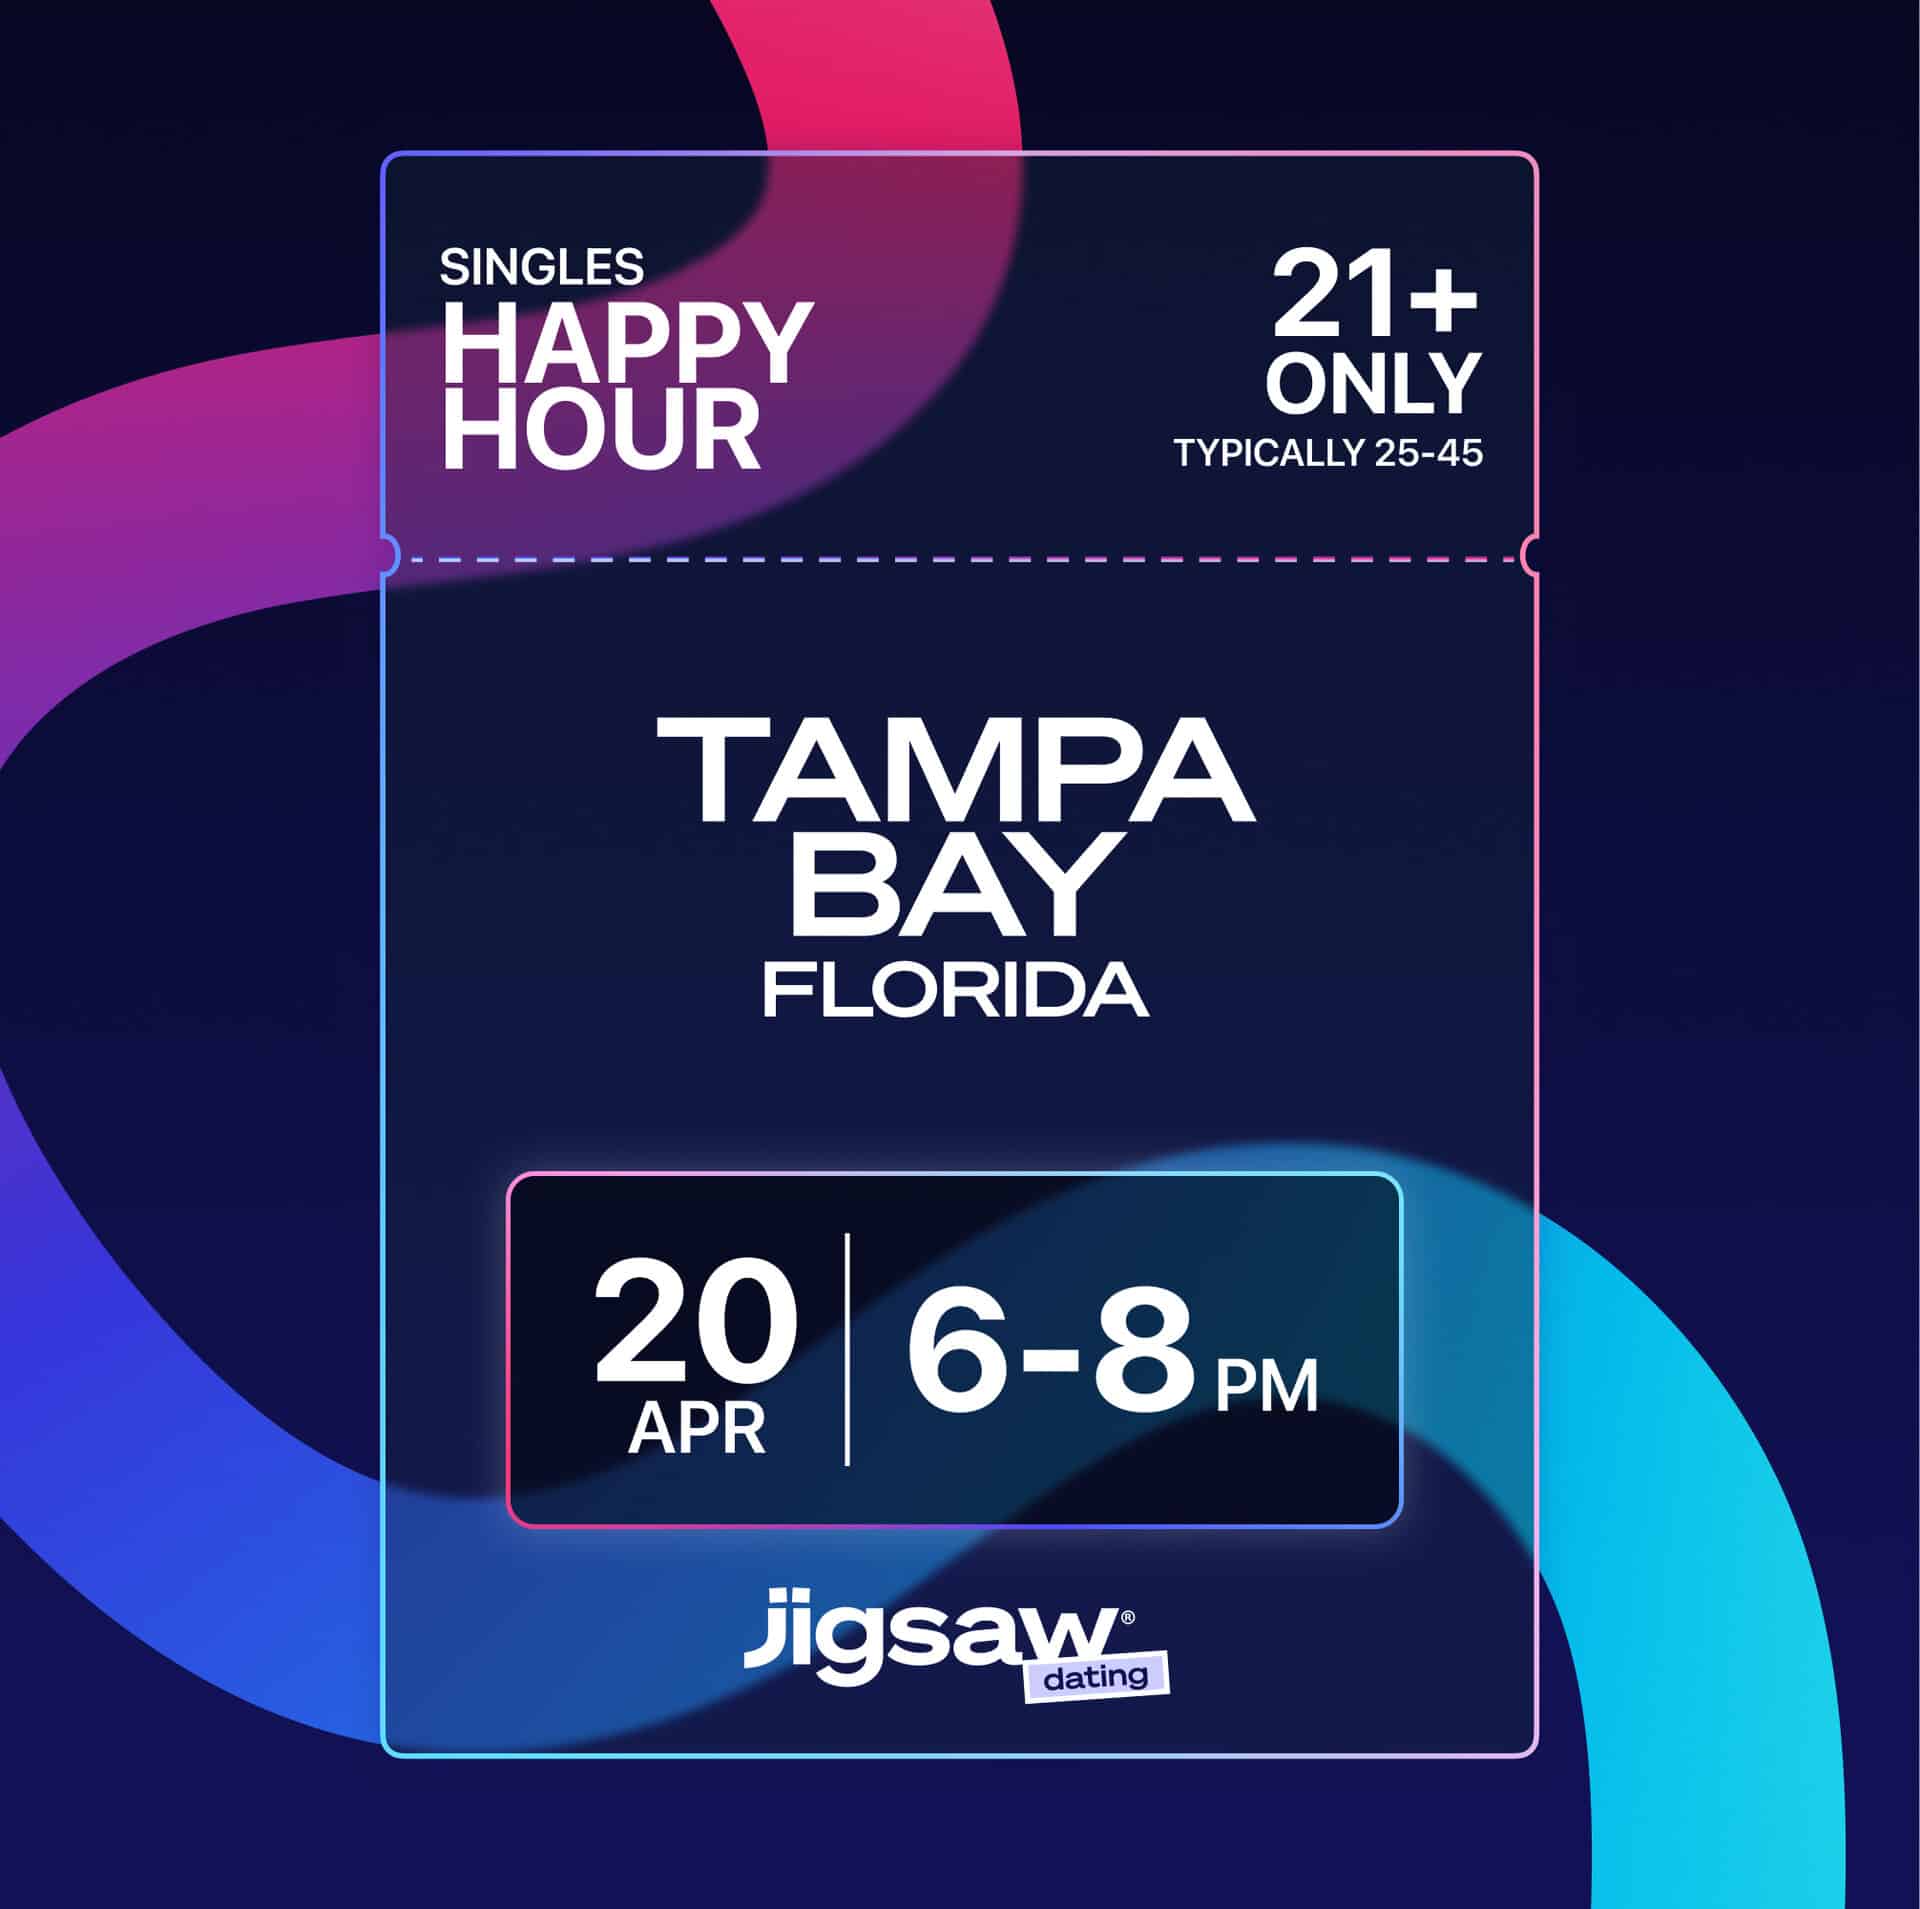 Tampa Bay April Singles Happy Hour with Jigsaw Dating at The Patio Tampa from 6pm-8pm on April 20th